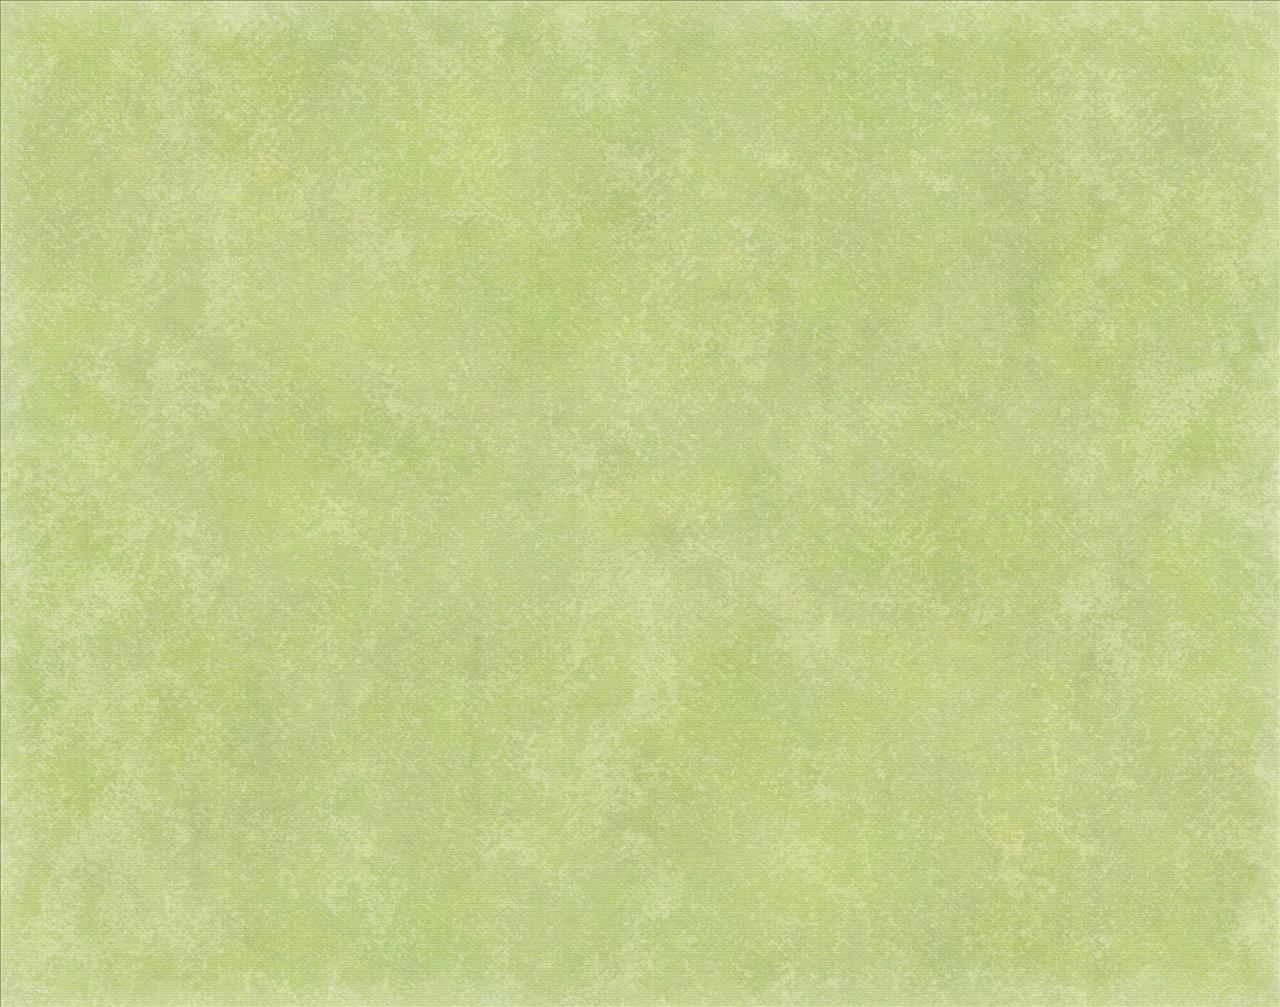 Texture Light Green Pale Light Wallpaper For Painting Macro Stock Photo   Download Image Now  iStock